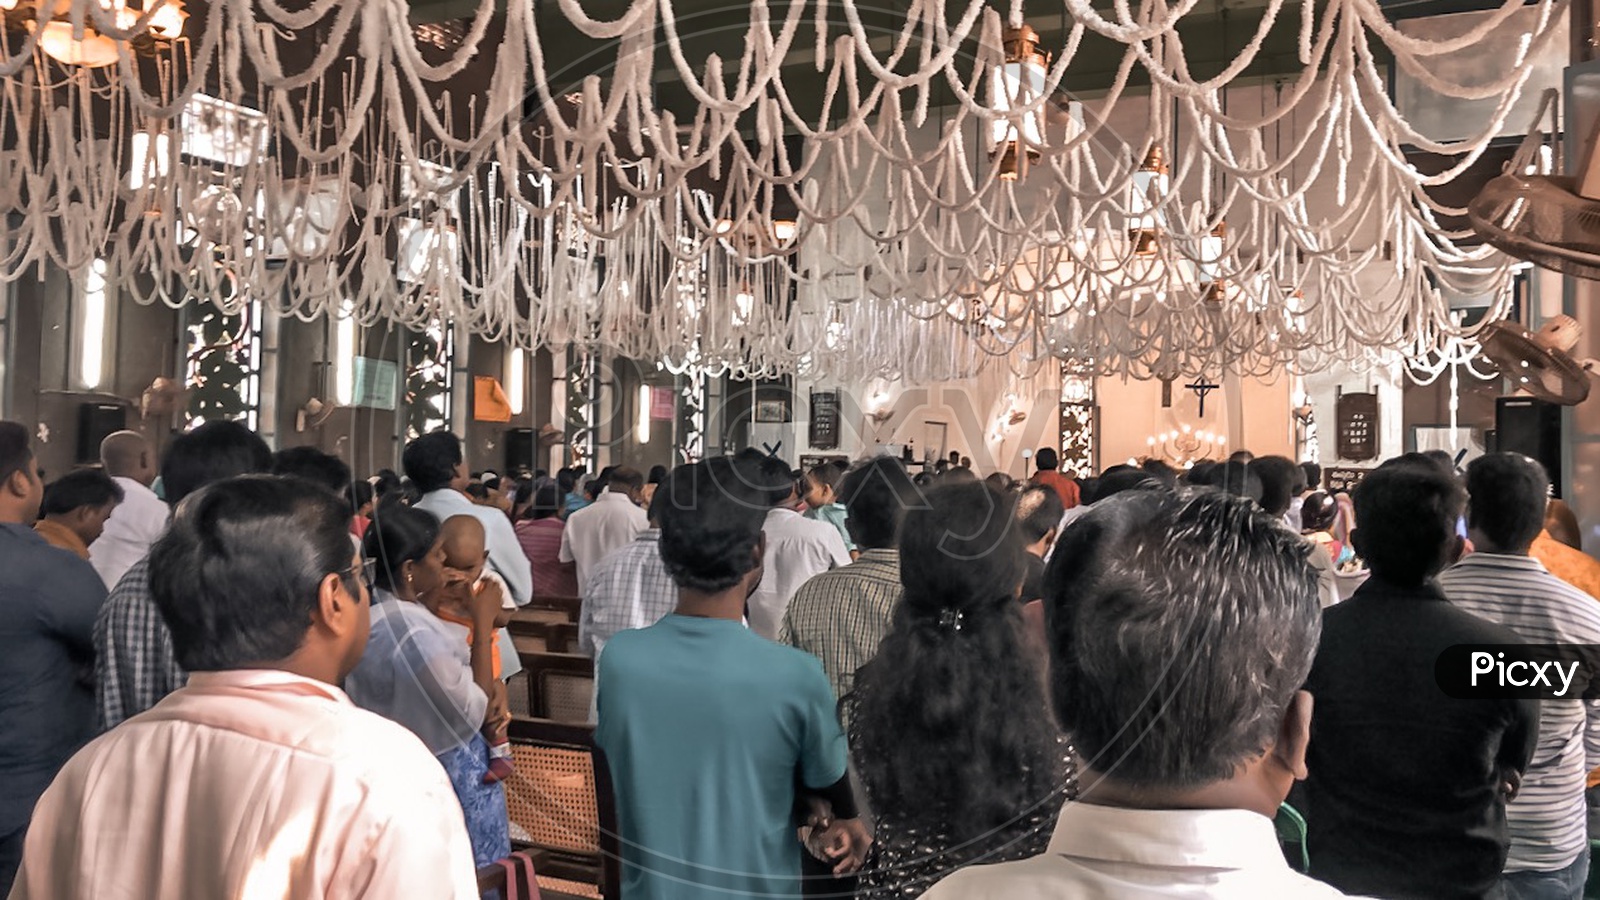 Devotees in the church during worship